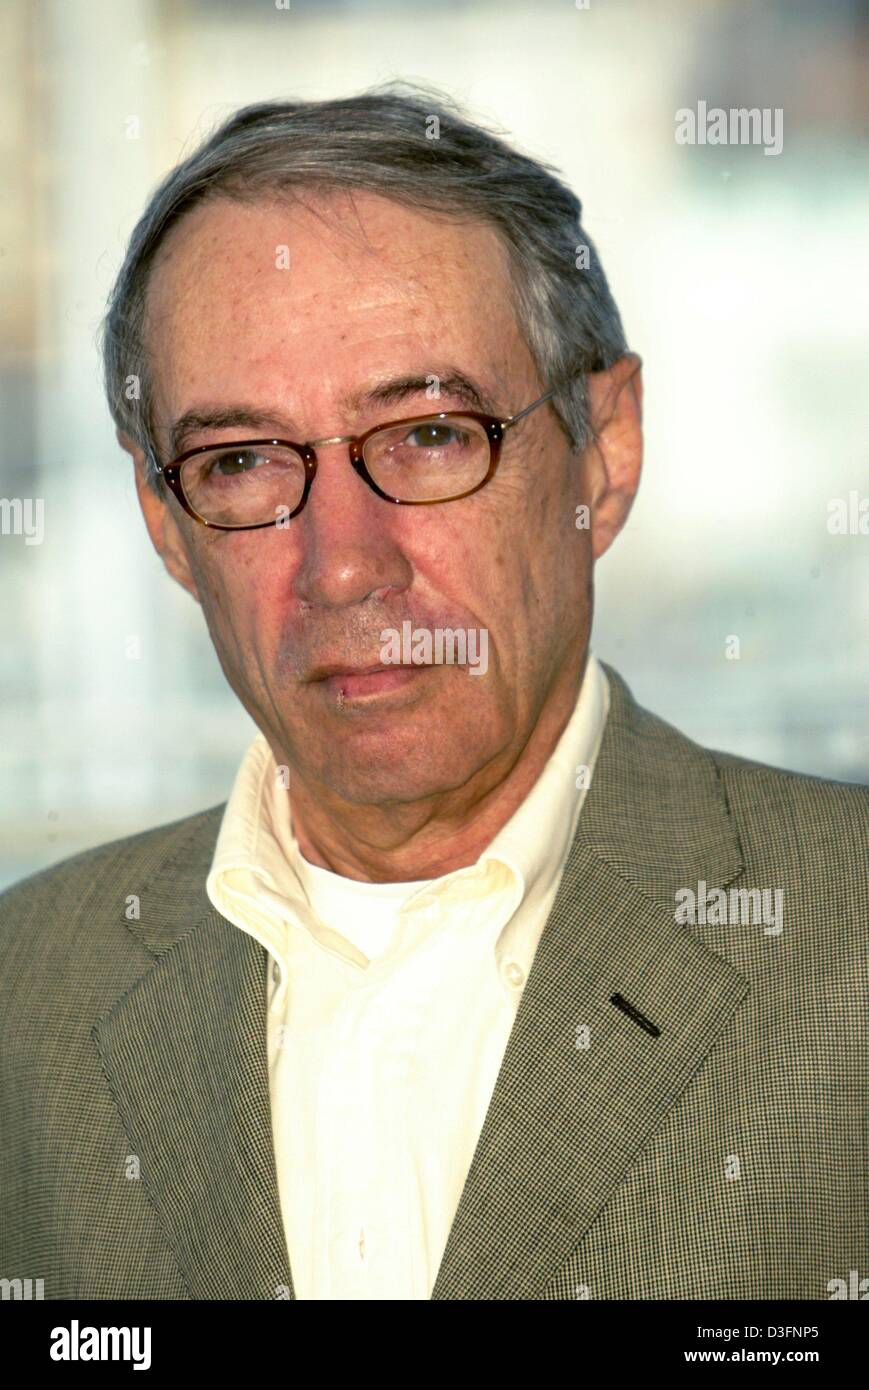 dpa) - The French film director Andre Techine ('Strayed', 'Beach Cafe',  'Far Away') poses at the 56th Filmfestival in Cannes, France, 16 May 2003.  Techine will present his movie 'Strayed' (Les Egares).